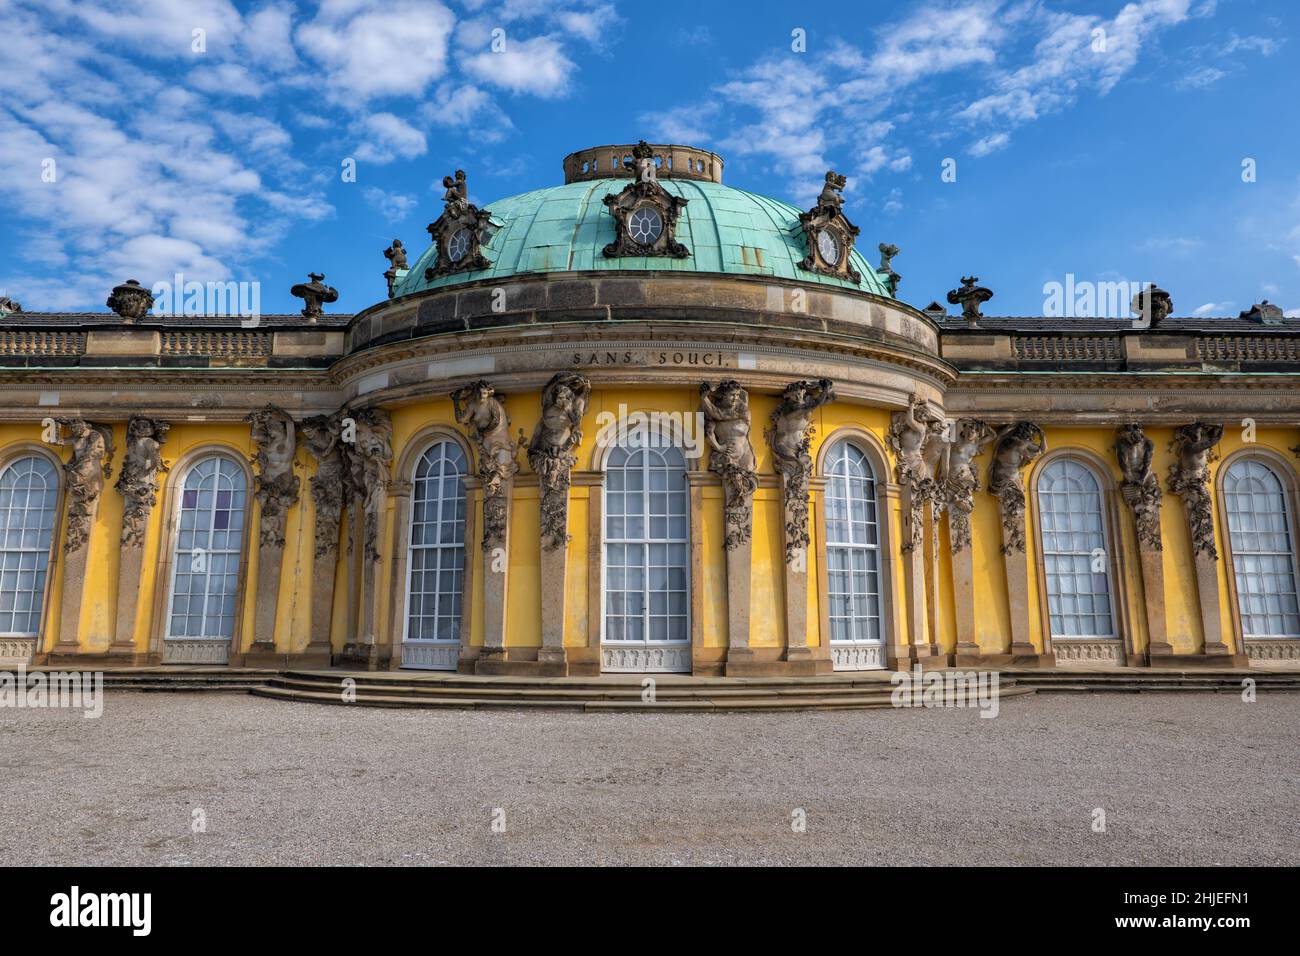 Potsdam, Germany, Sanssouci Palace, Frederick the Great, King of Prussia 18th century summer residence. Stock Photo